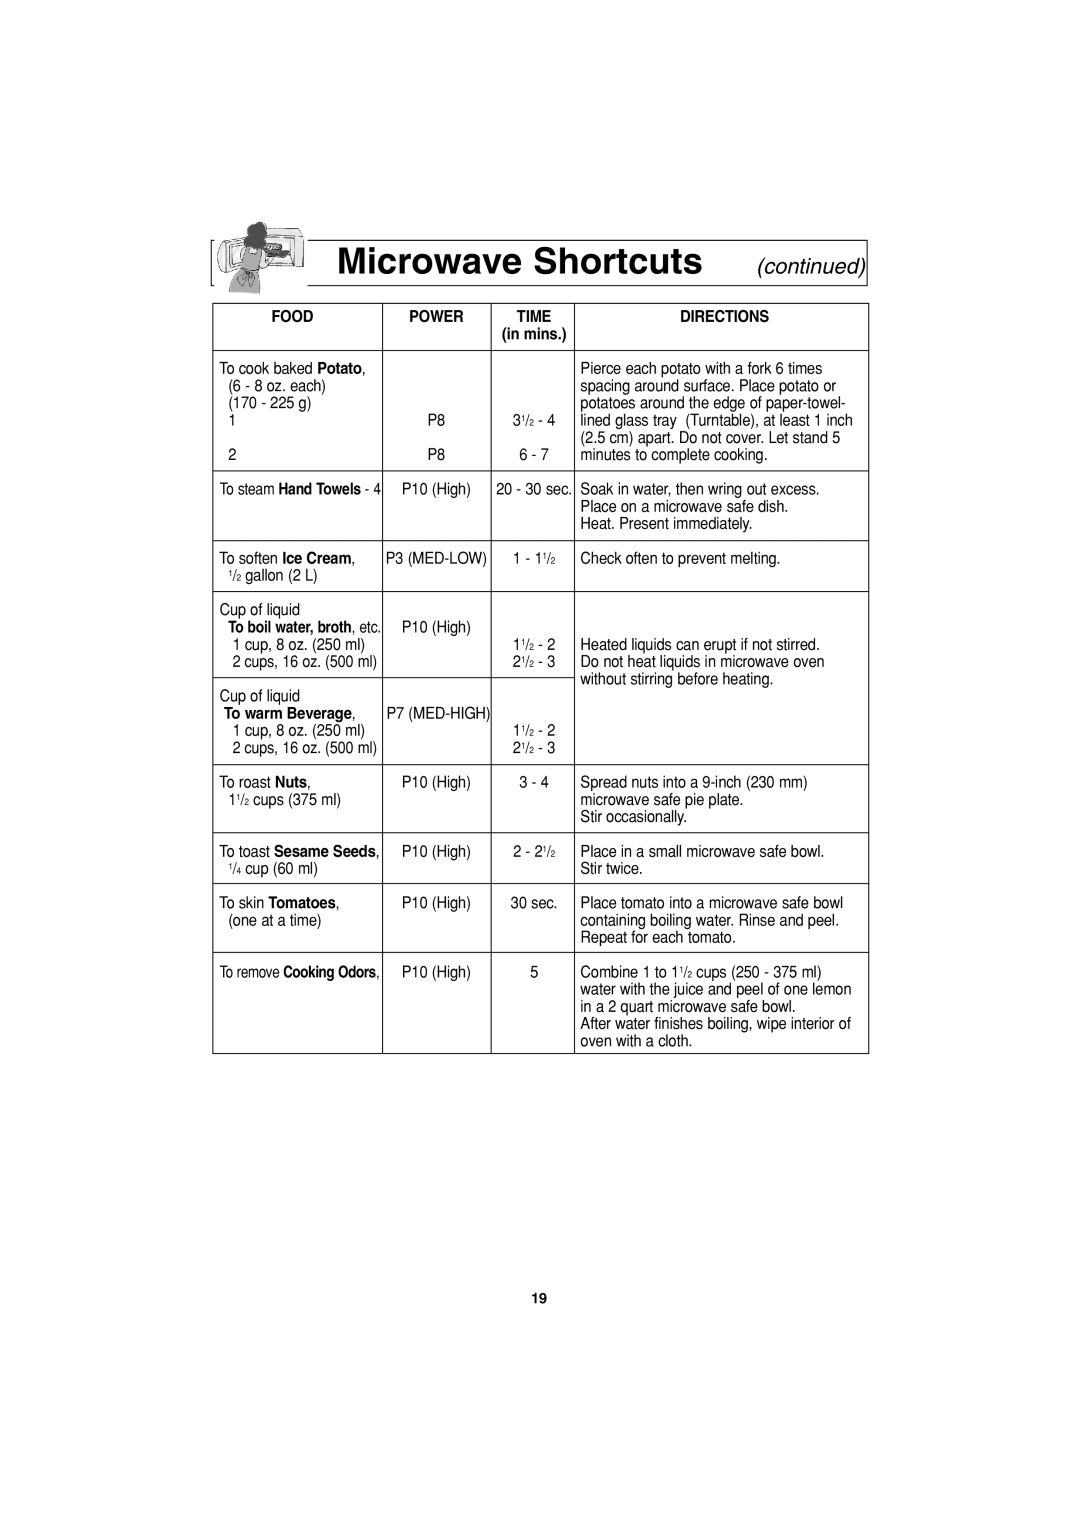 Panasonic NN-S953, NN-S753 operating instructions Microwave Shortcuts, continued, Food, Directions, To warm Beverage 